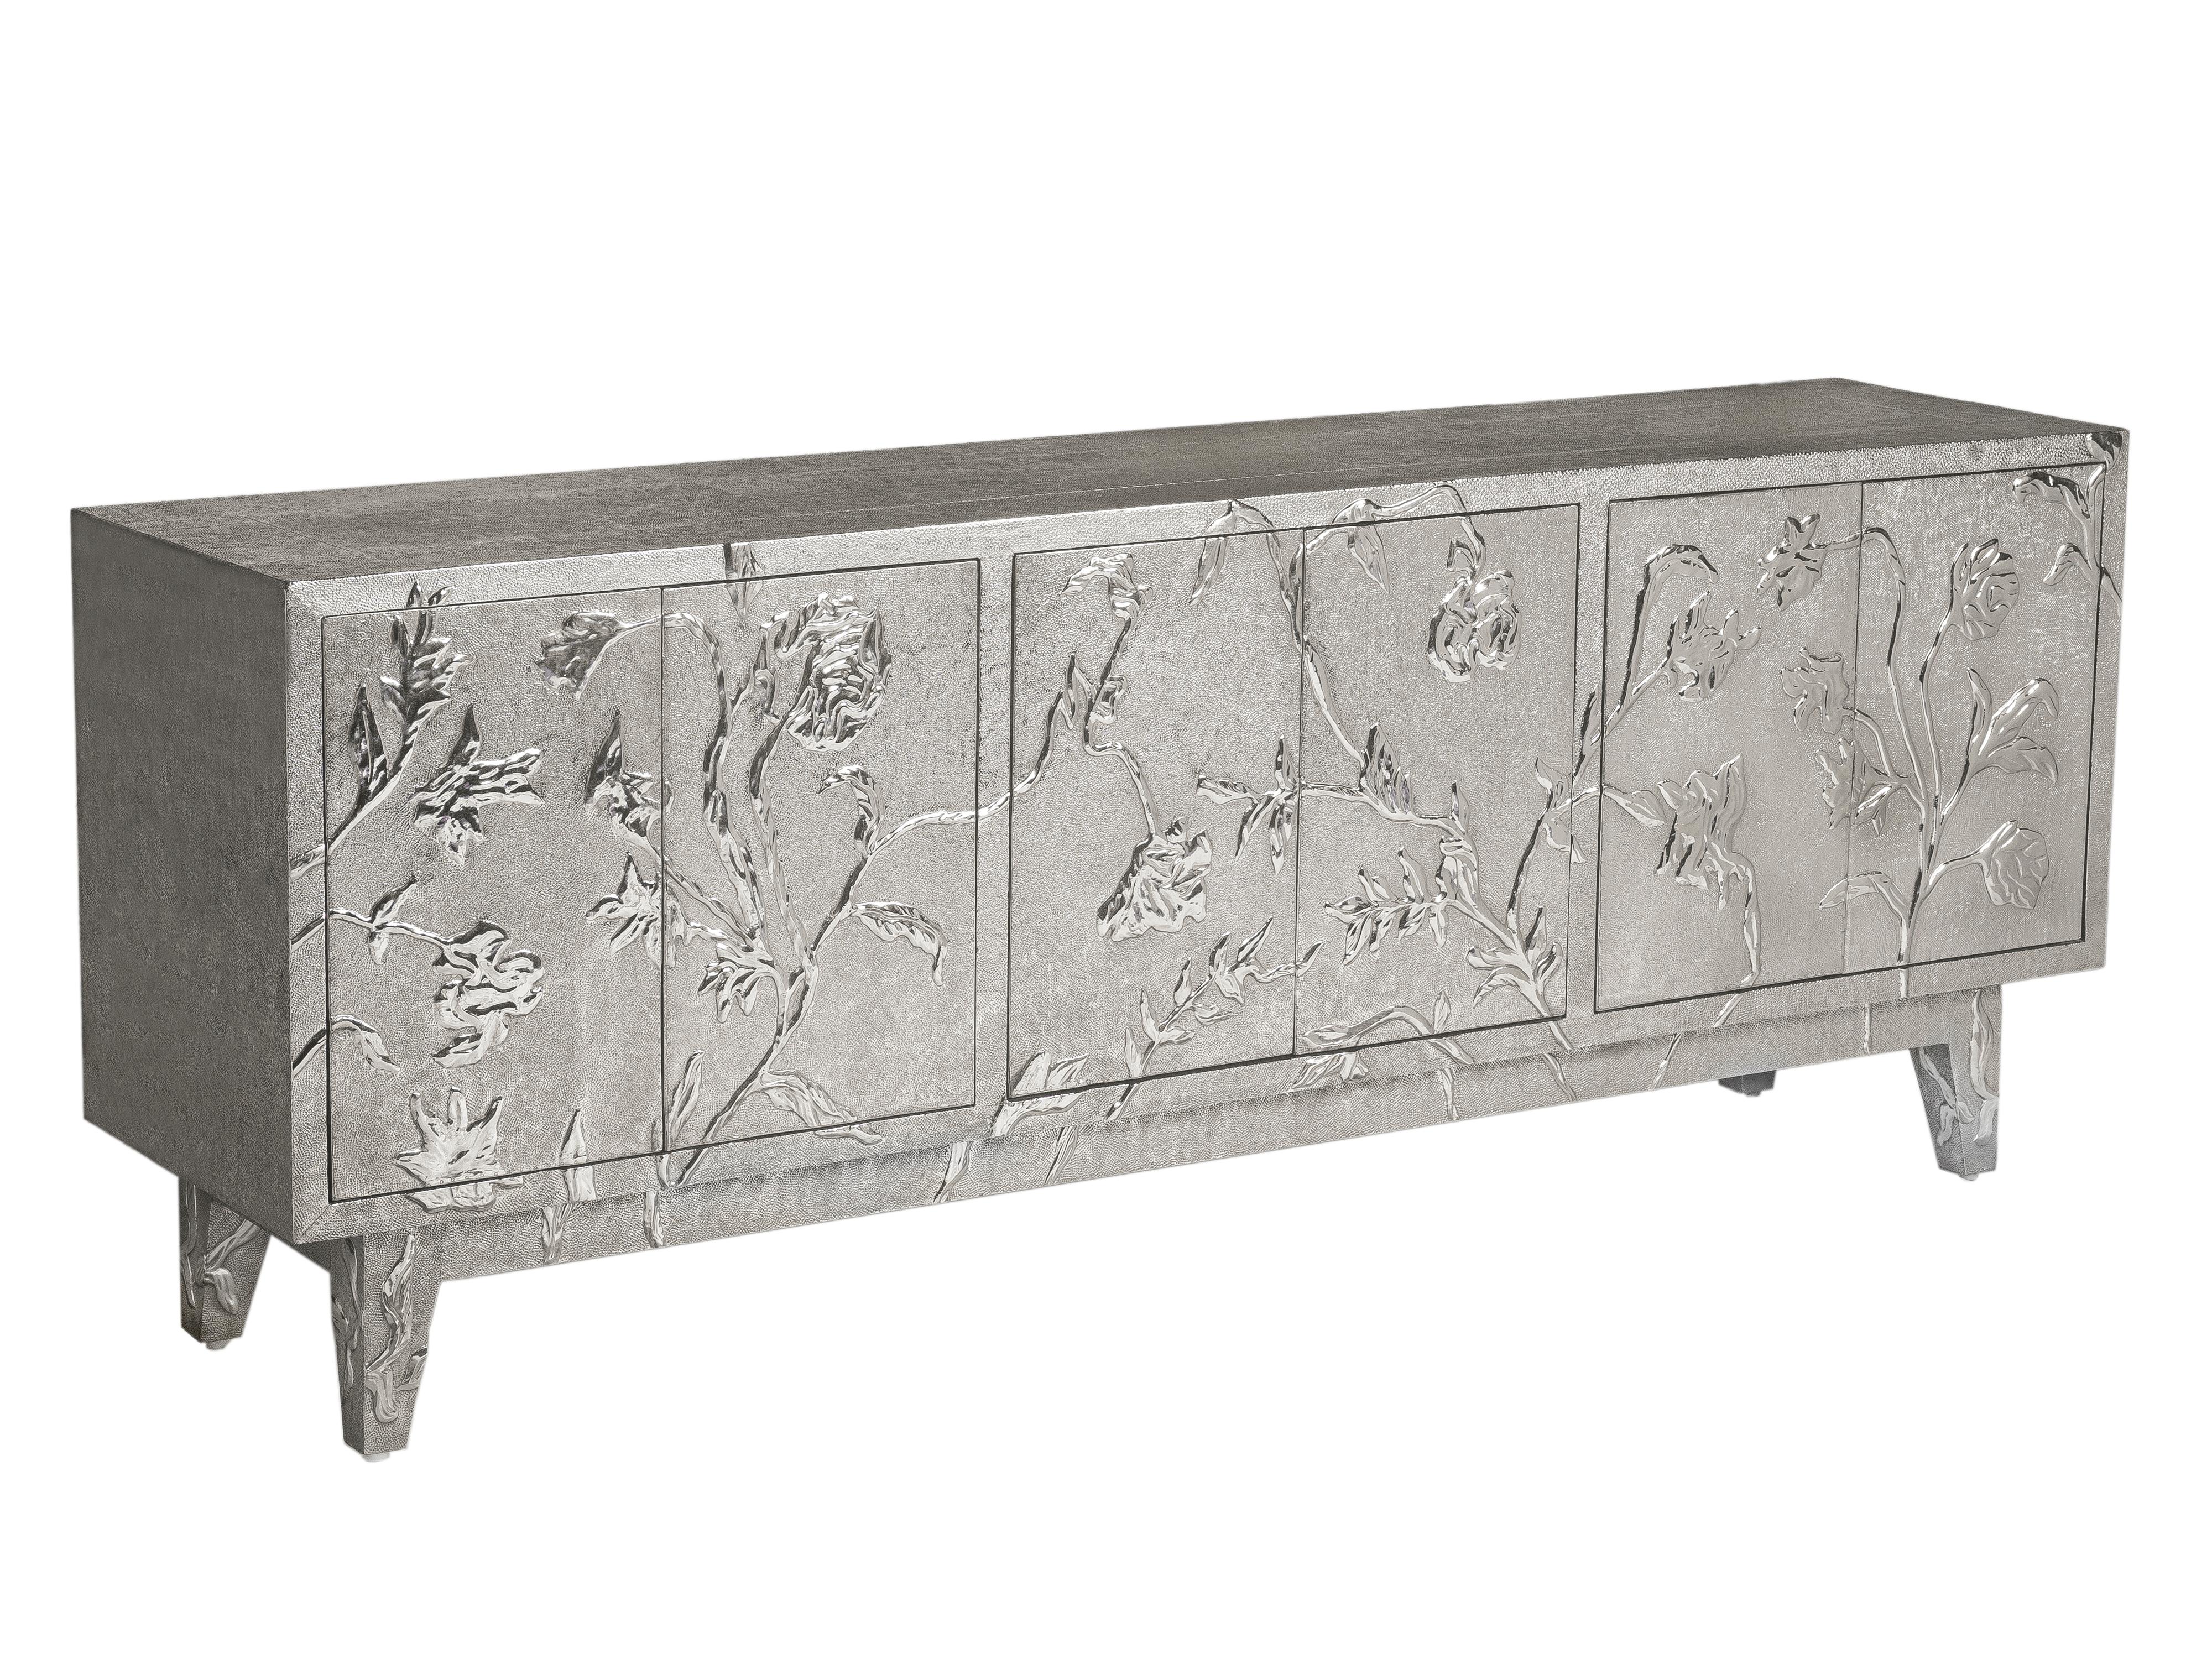 Mid-Century Modern credenza or Mid-Century Modern dresser is Inspired by the floral motifs used in the paintings of palaces of Rajasthan. This piece is one of the bestselling Mid-Century Modern credenza or Mid-Century Modern dresser of Stephanie